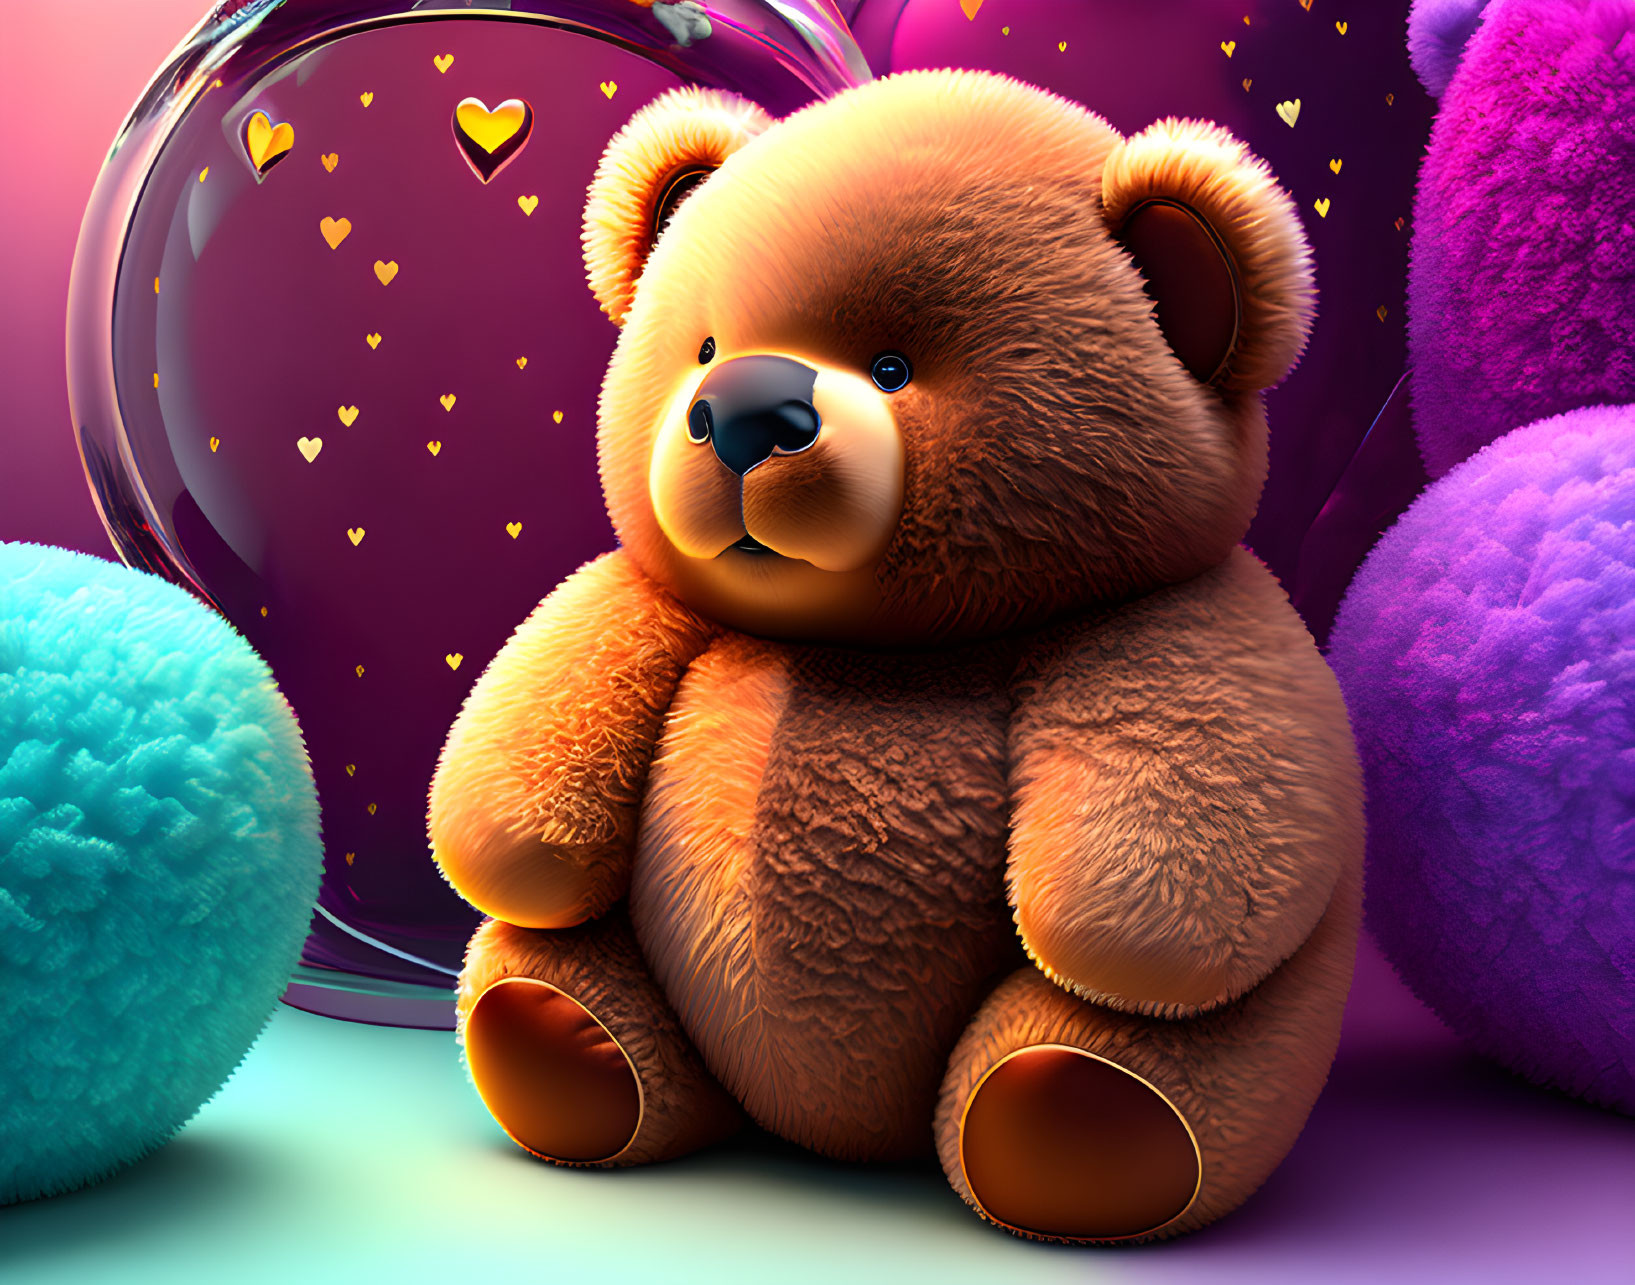 Plump Brown Teddy Bear Surrounded by Colorful Fluffy Balls